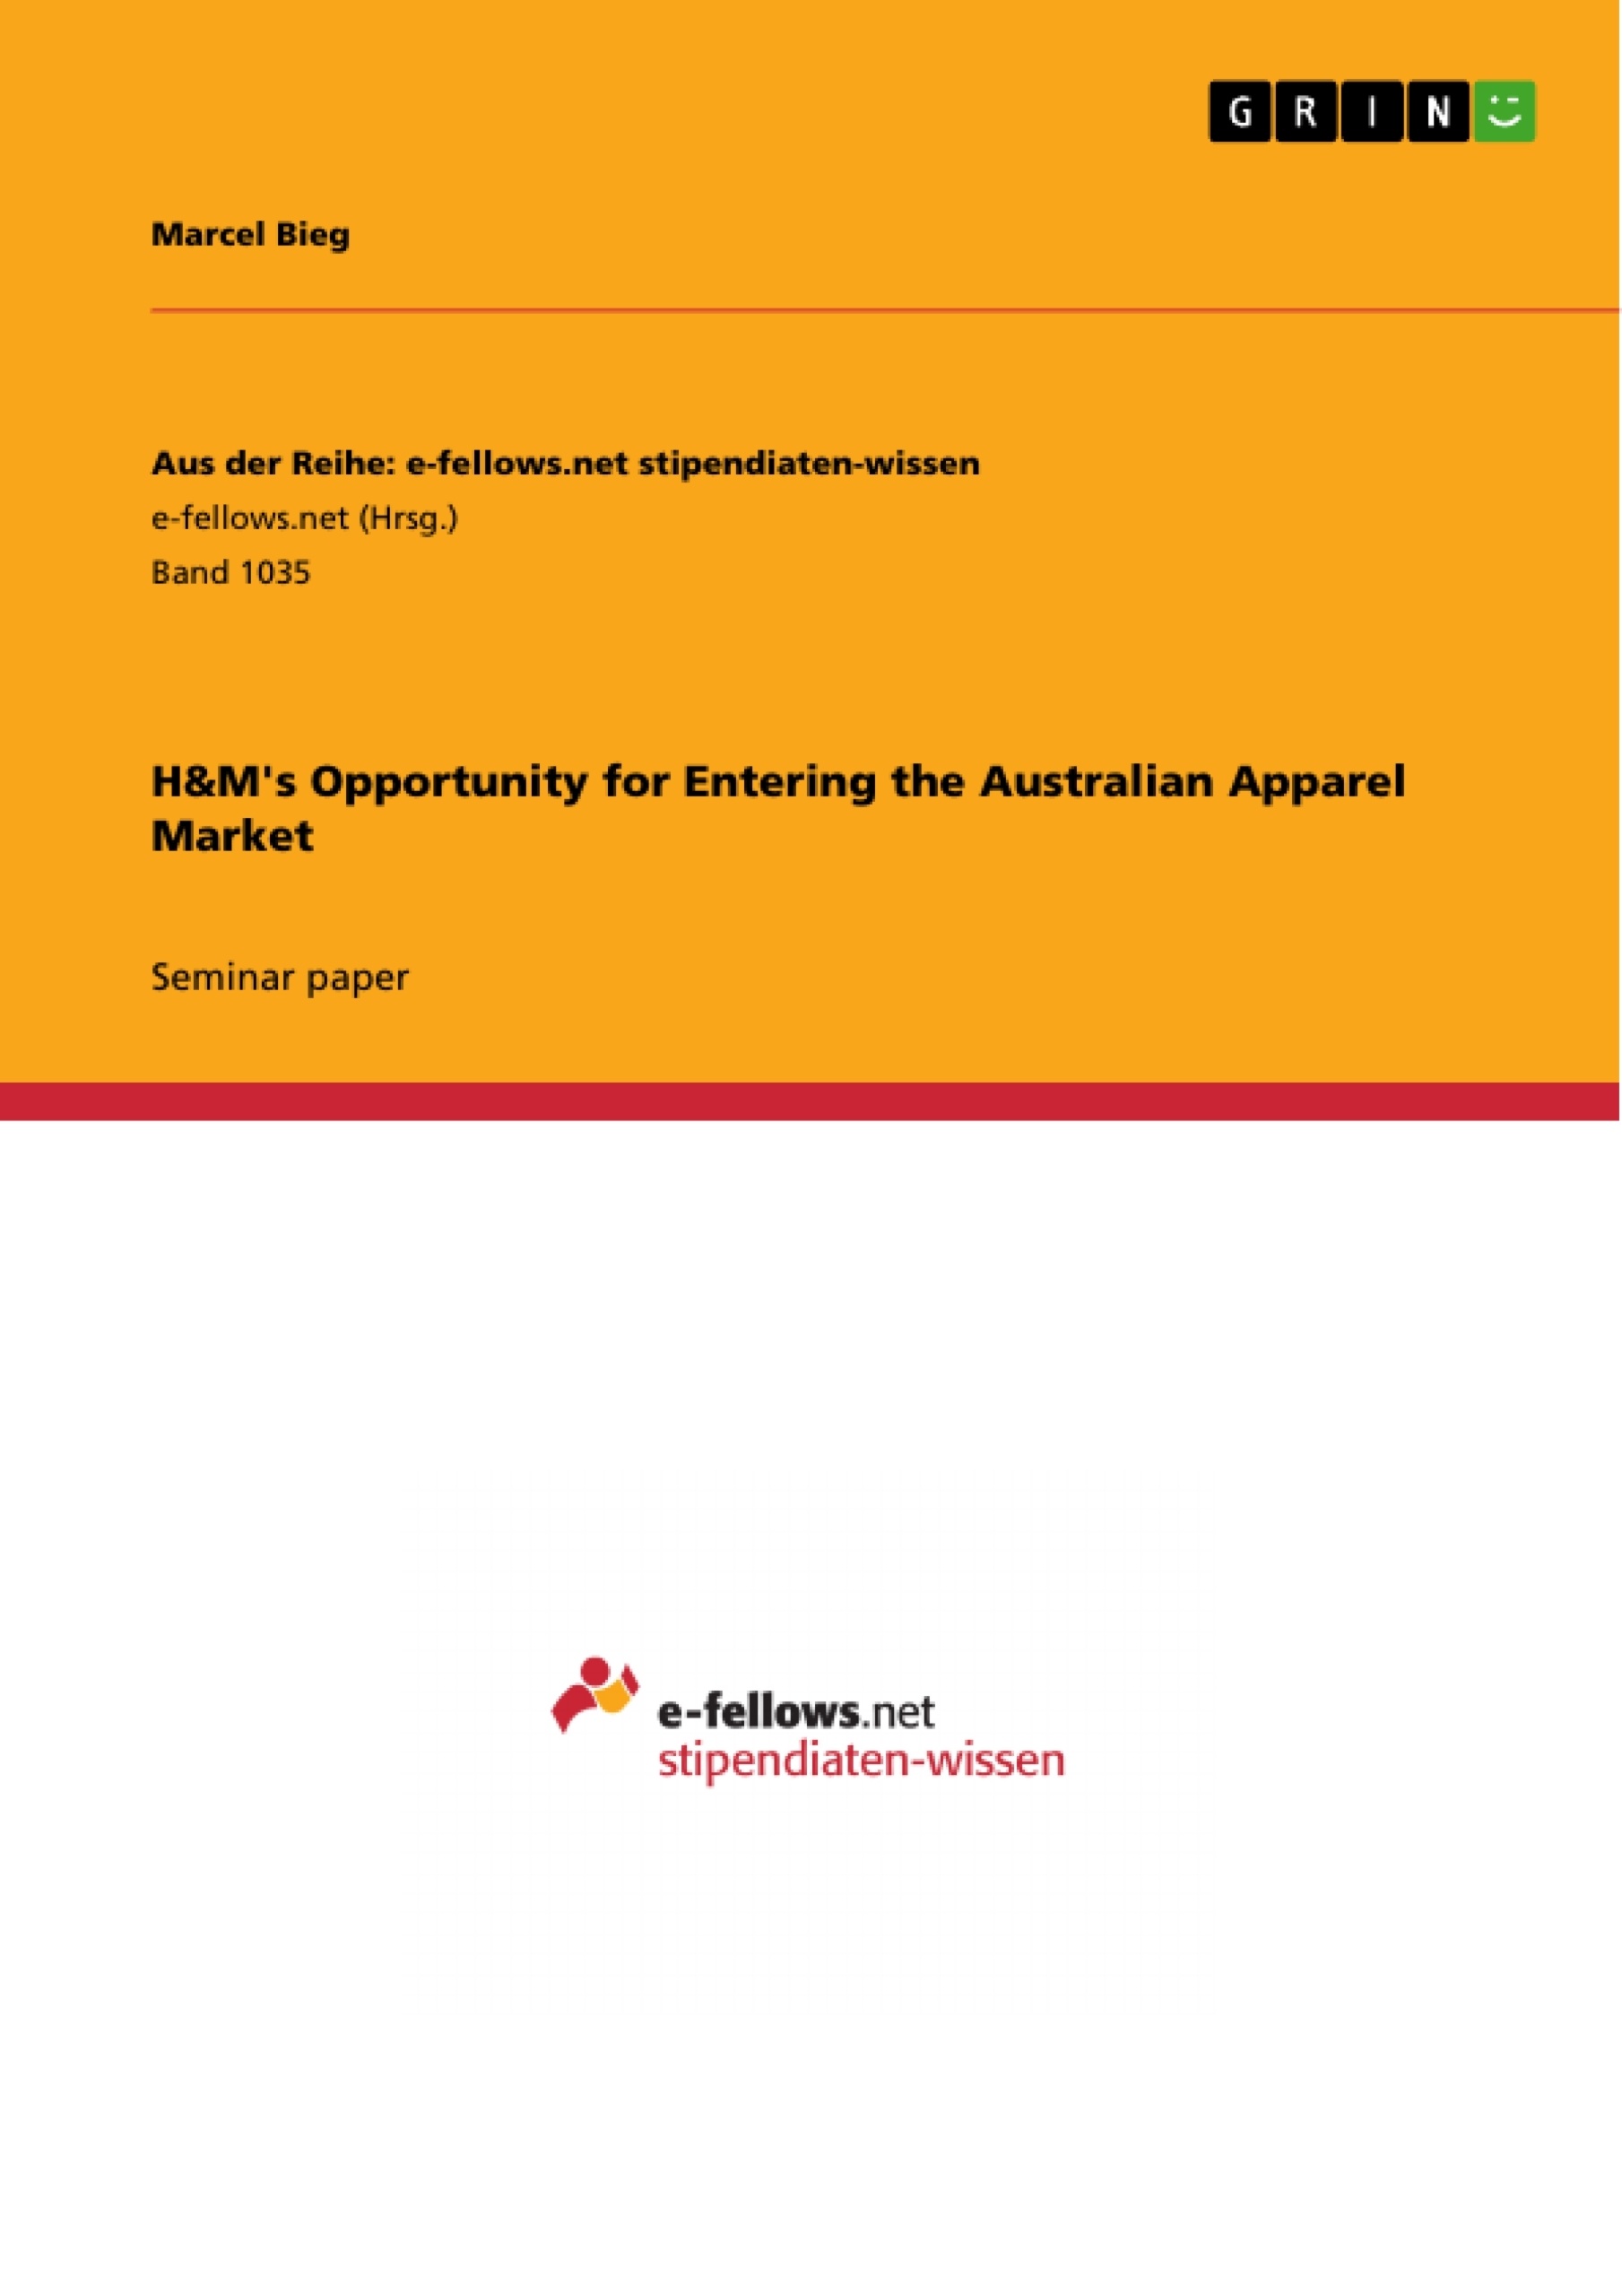 Title: H&M's Opportunity for Entering the Australian Apparel Market